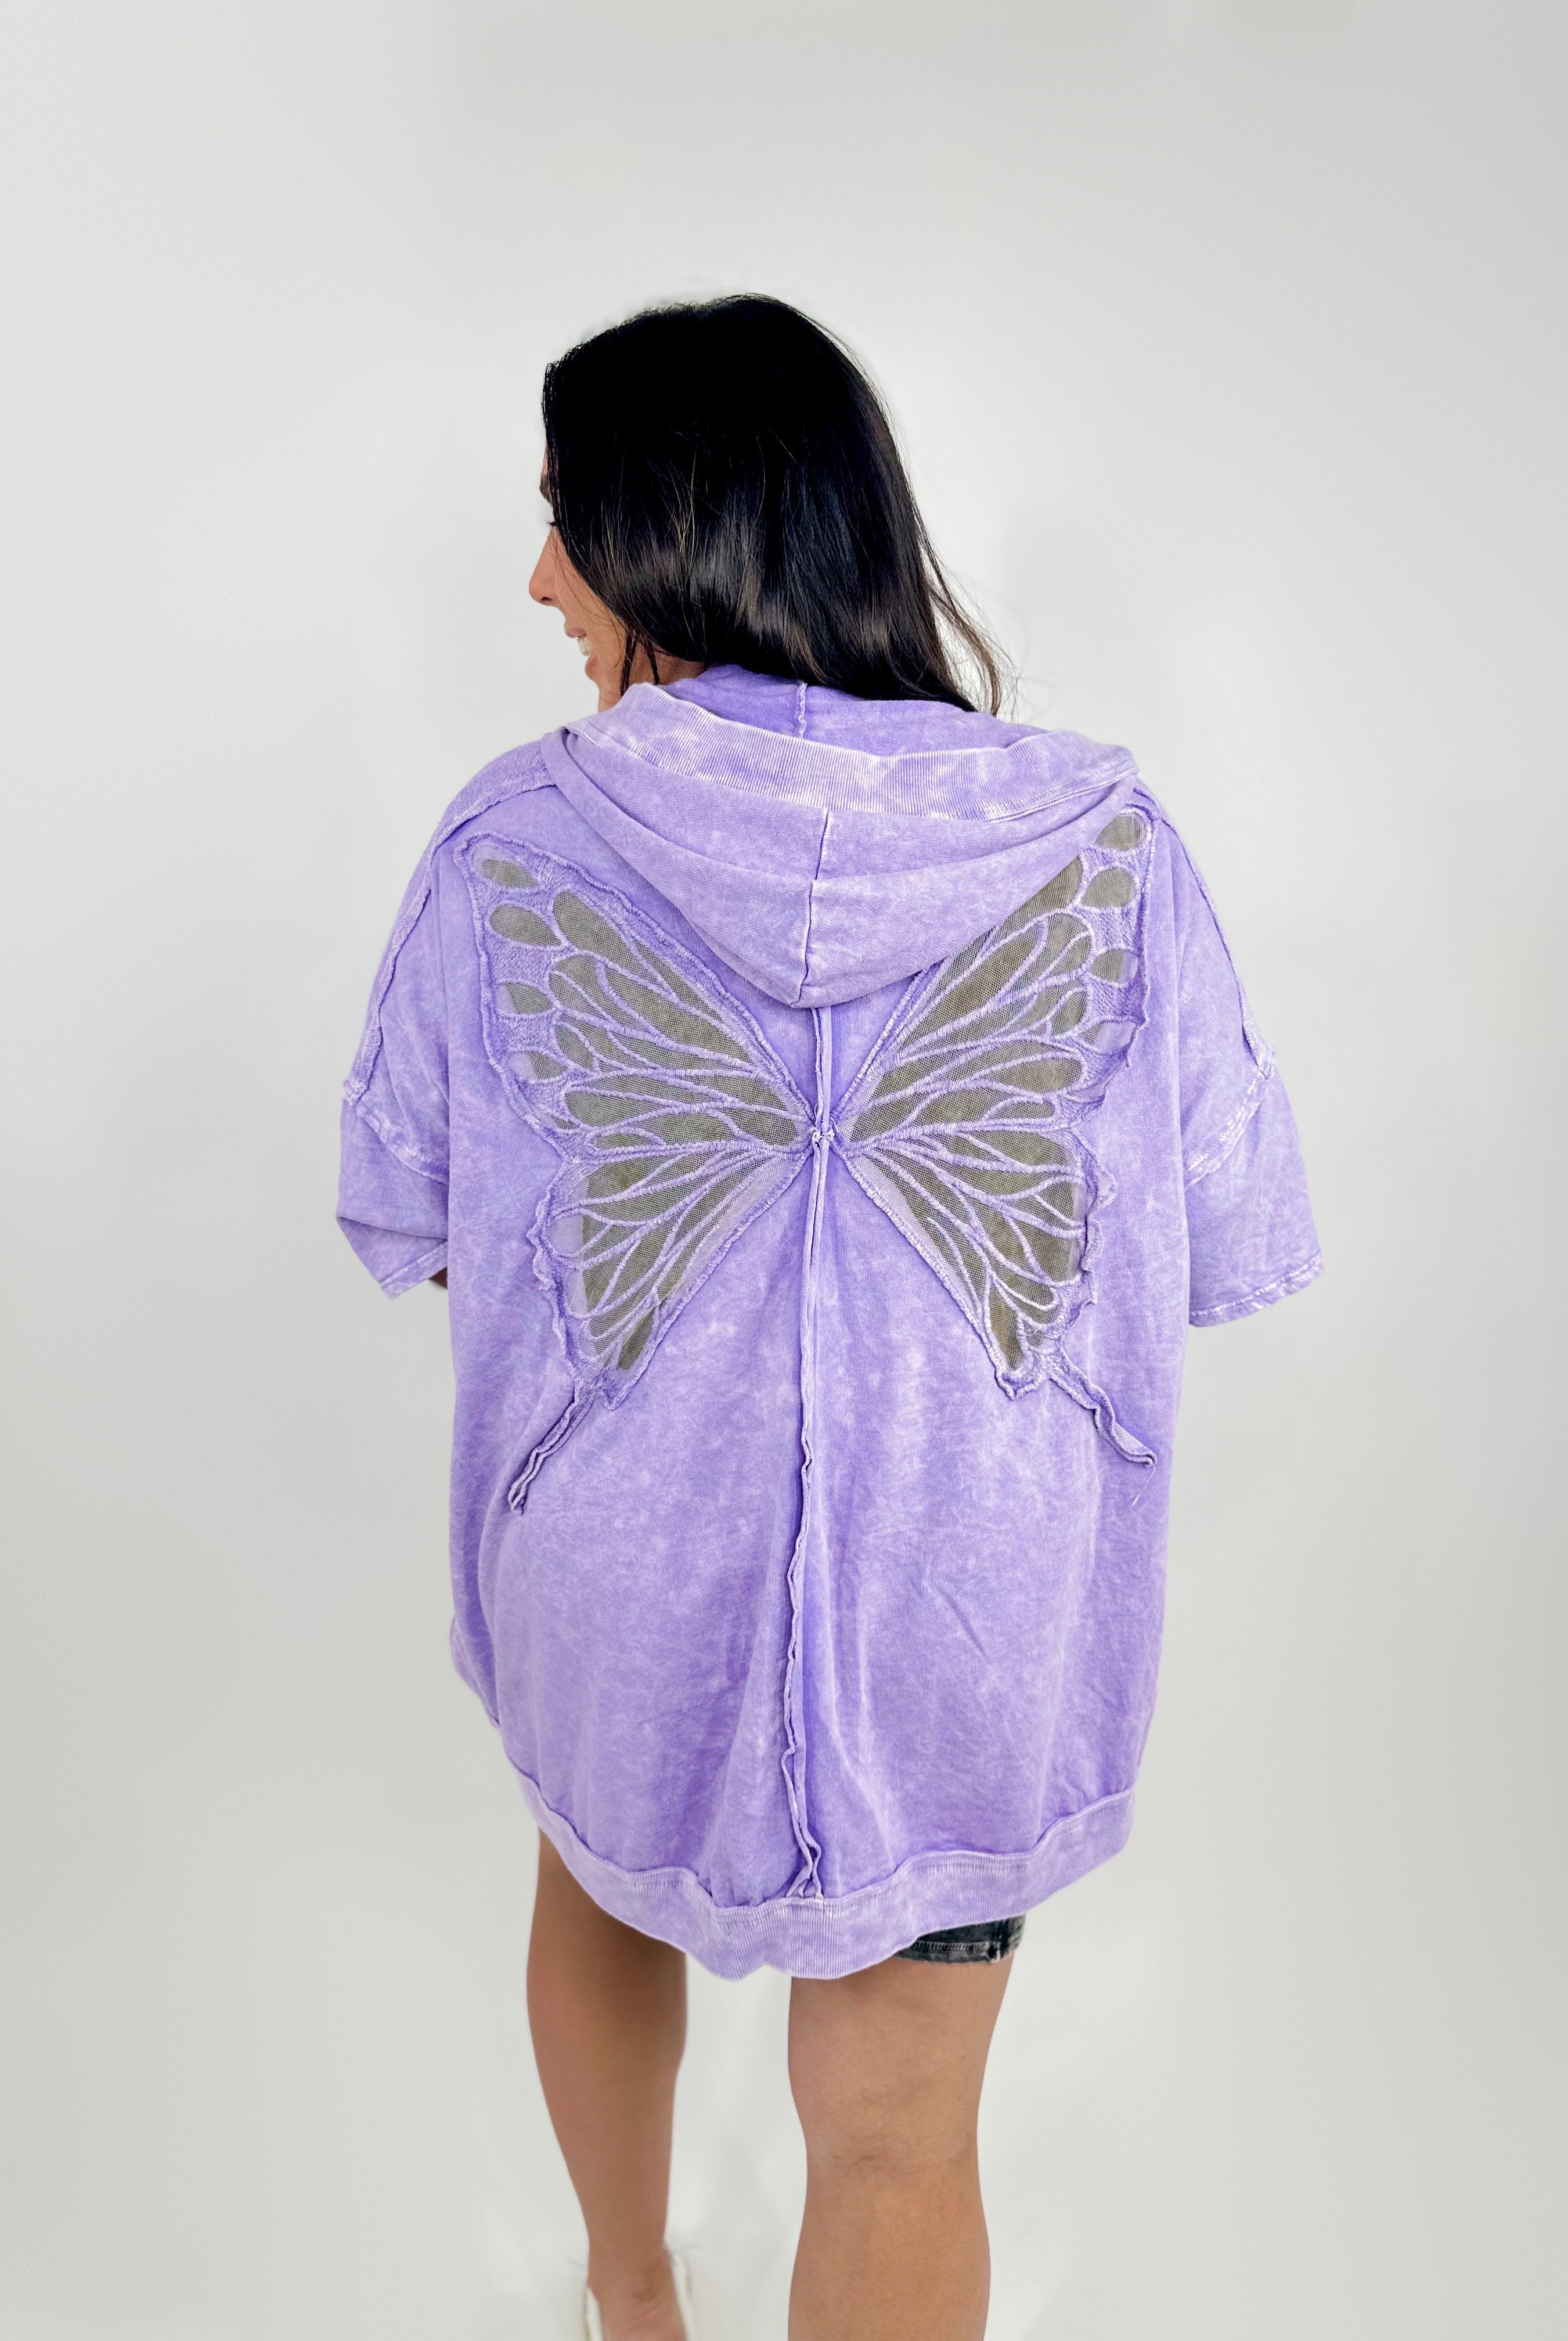 Mariposa Cardigan Hoodie - Lavender-210 Hoodies-J. Her-Heathered Boho Boutique, Women's Fashion and Accessories in Palmetto, FL